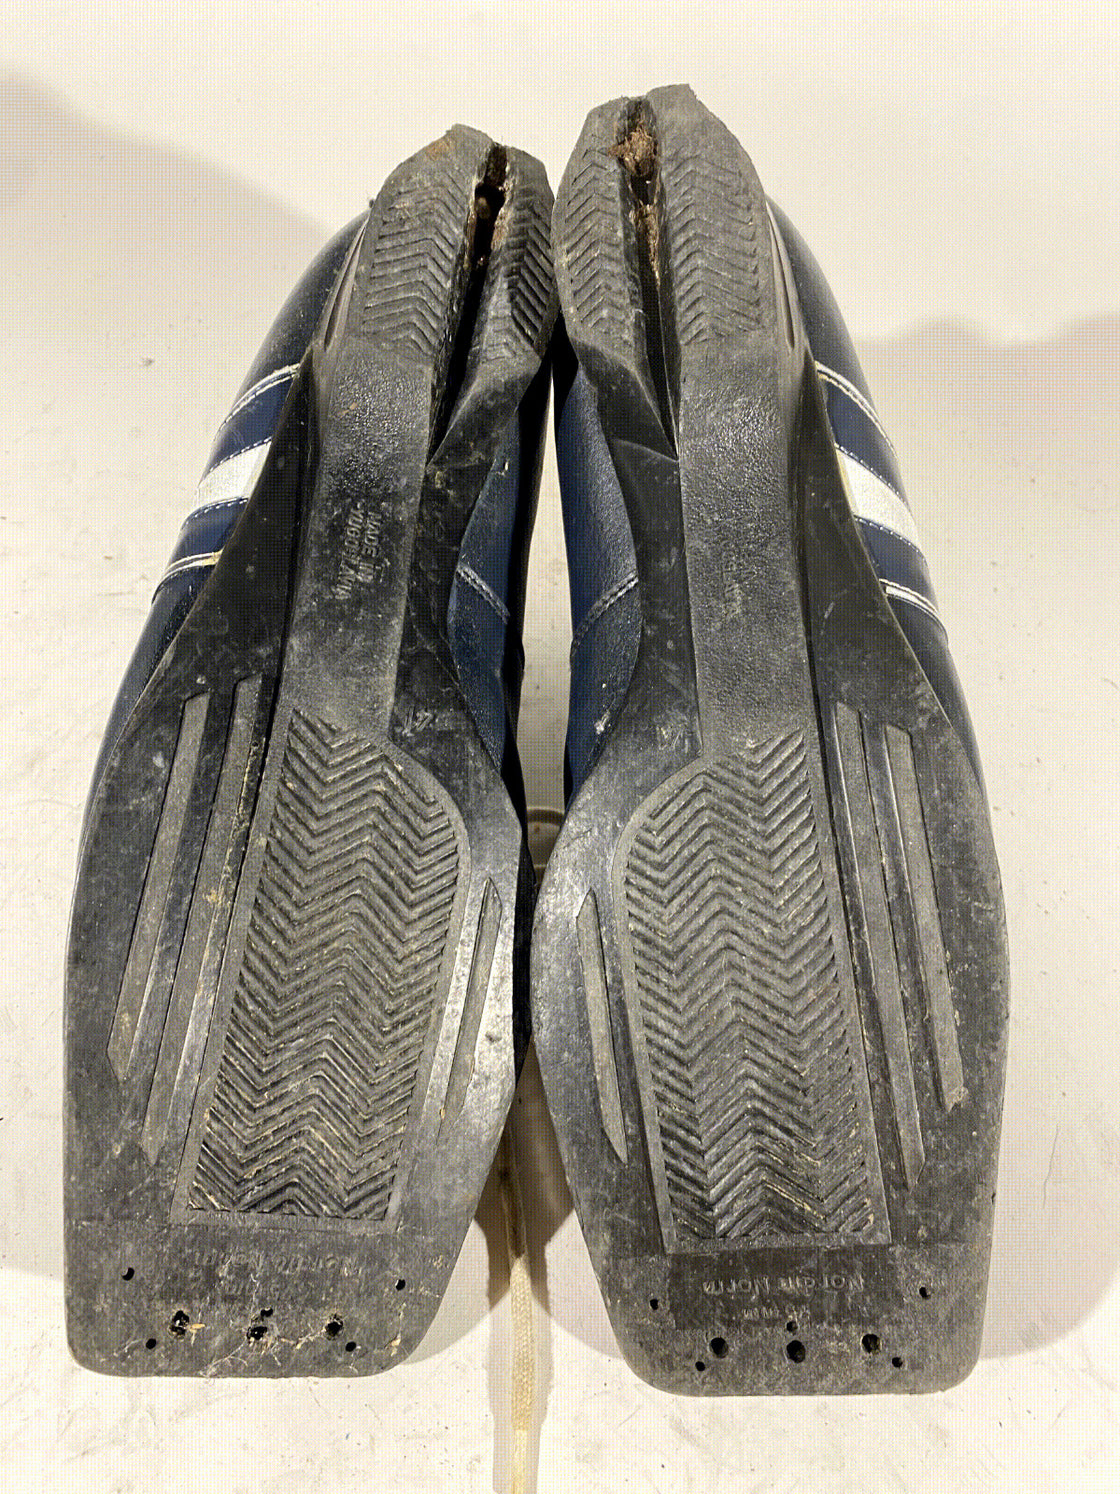 Alpina Vintage Nordic Norm Cross Country Ski Boots Size EU41 US8 NN 75mm